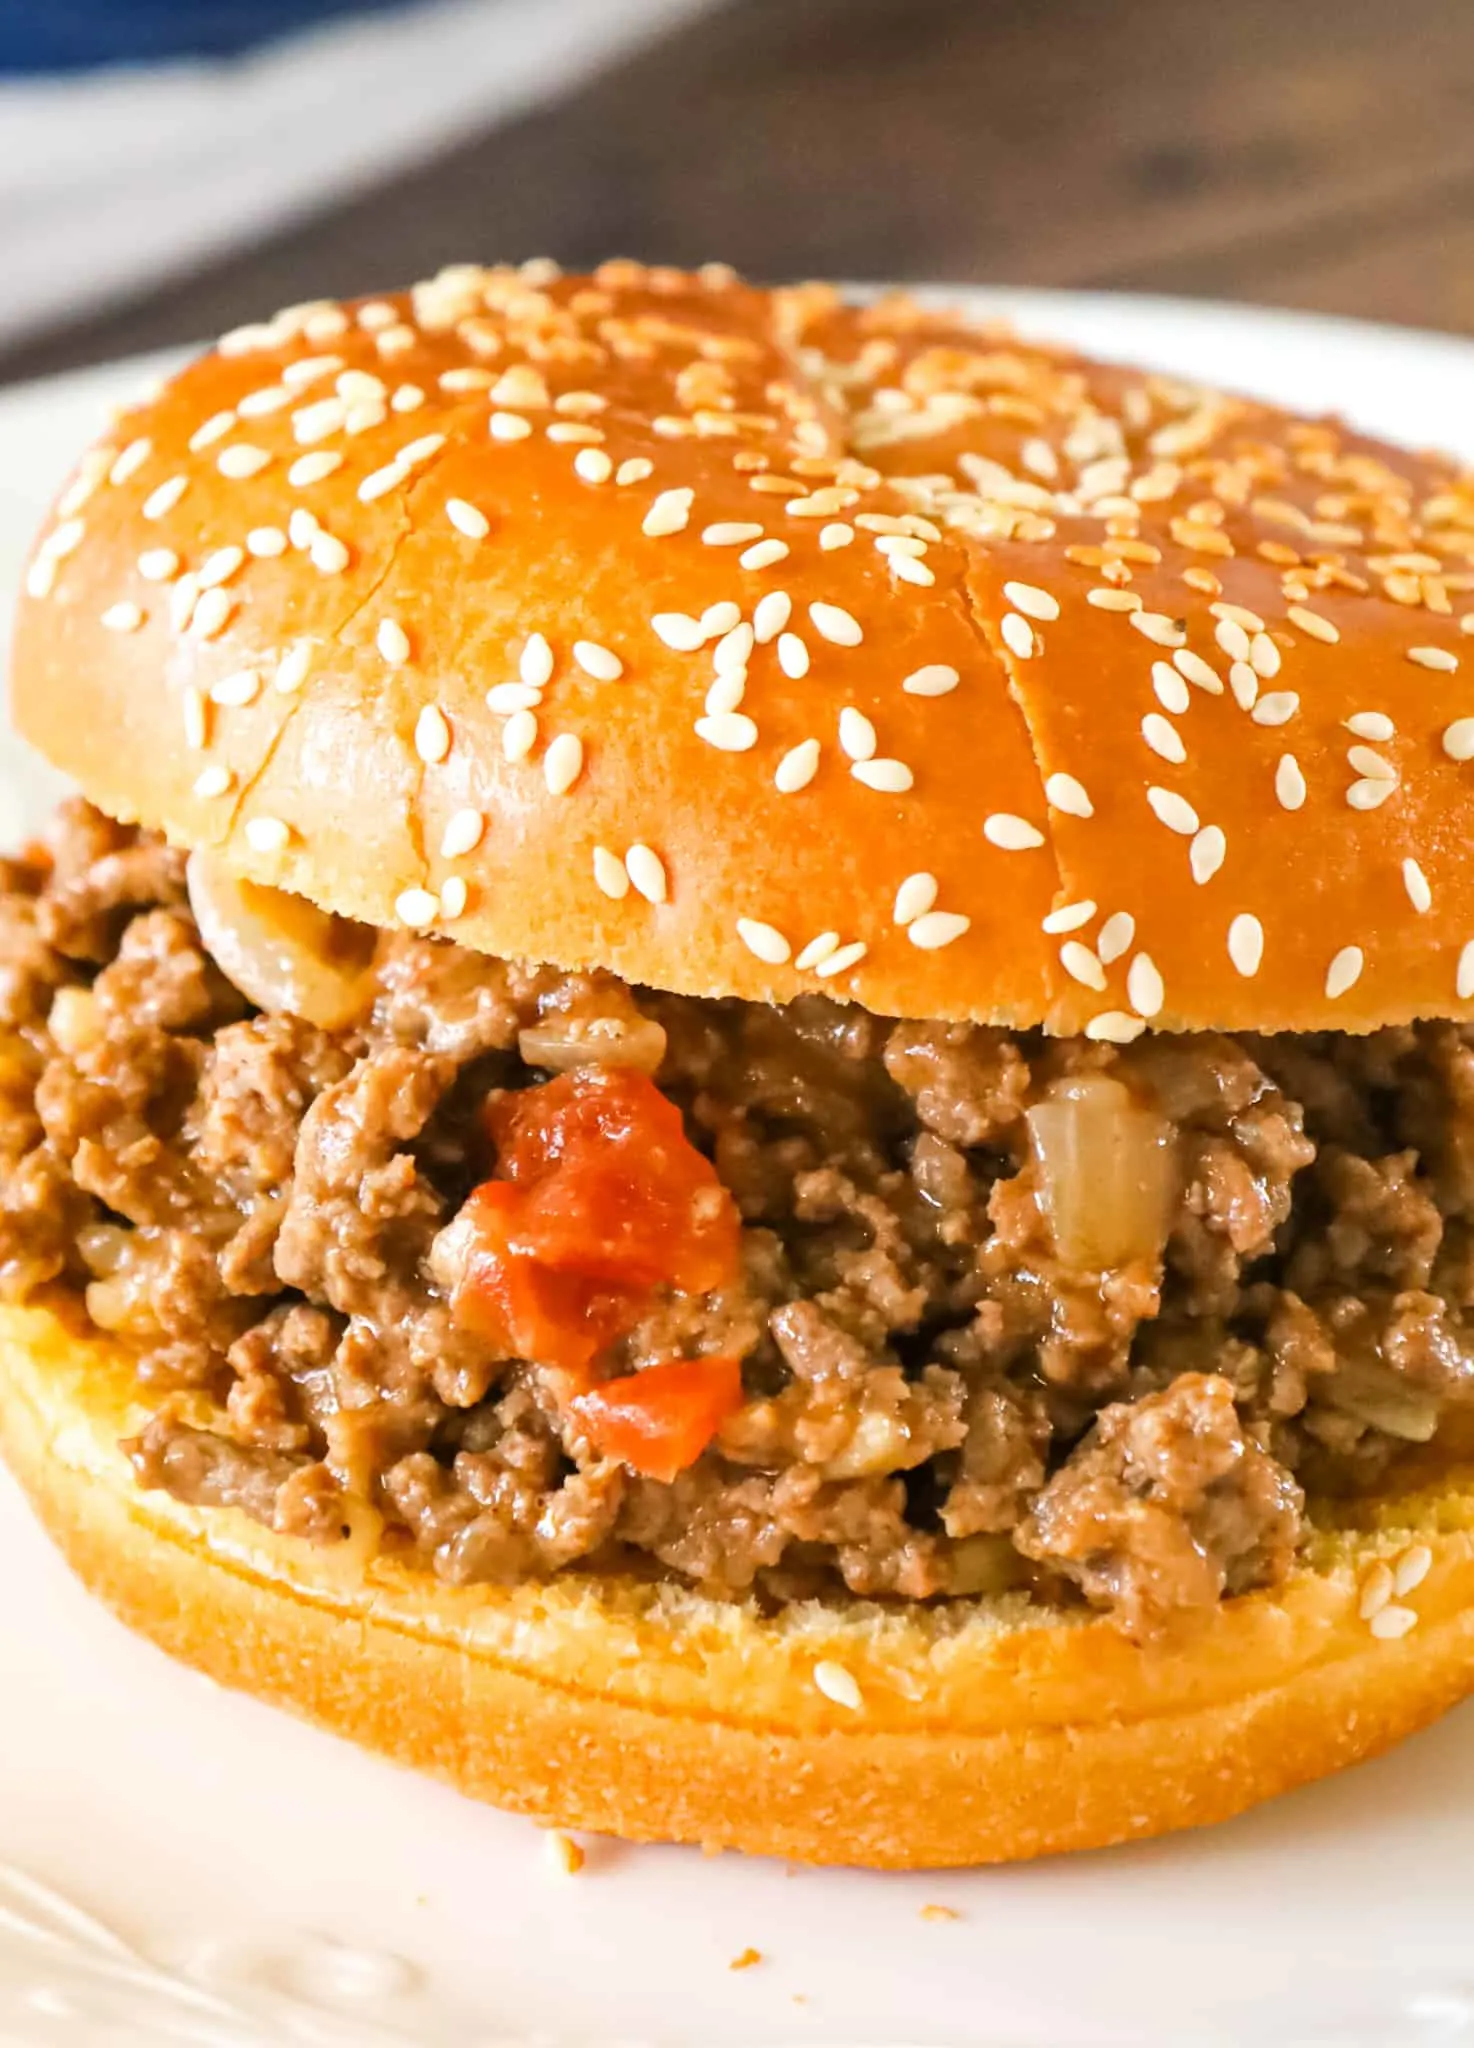 Chicken Gumbo Sloppy Joes are an easy weeknight dinner recipe using lean ground beef and Campbell's chicken gumbo soup.